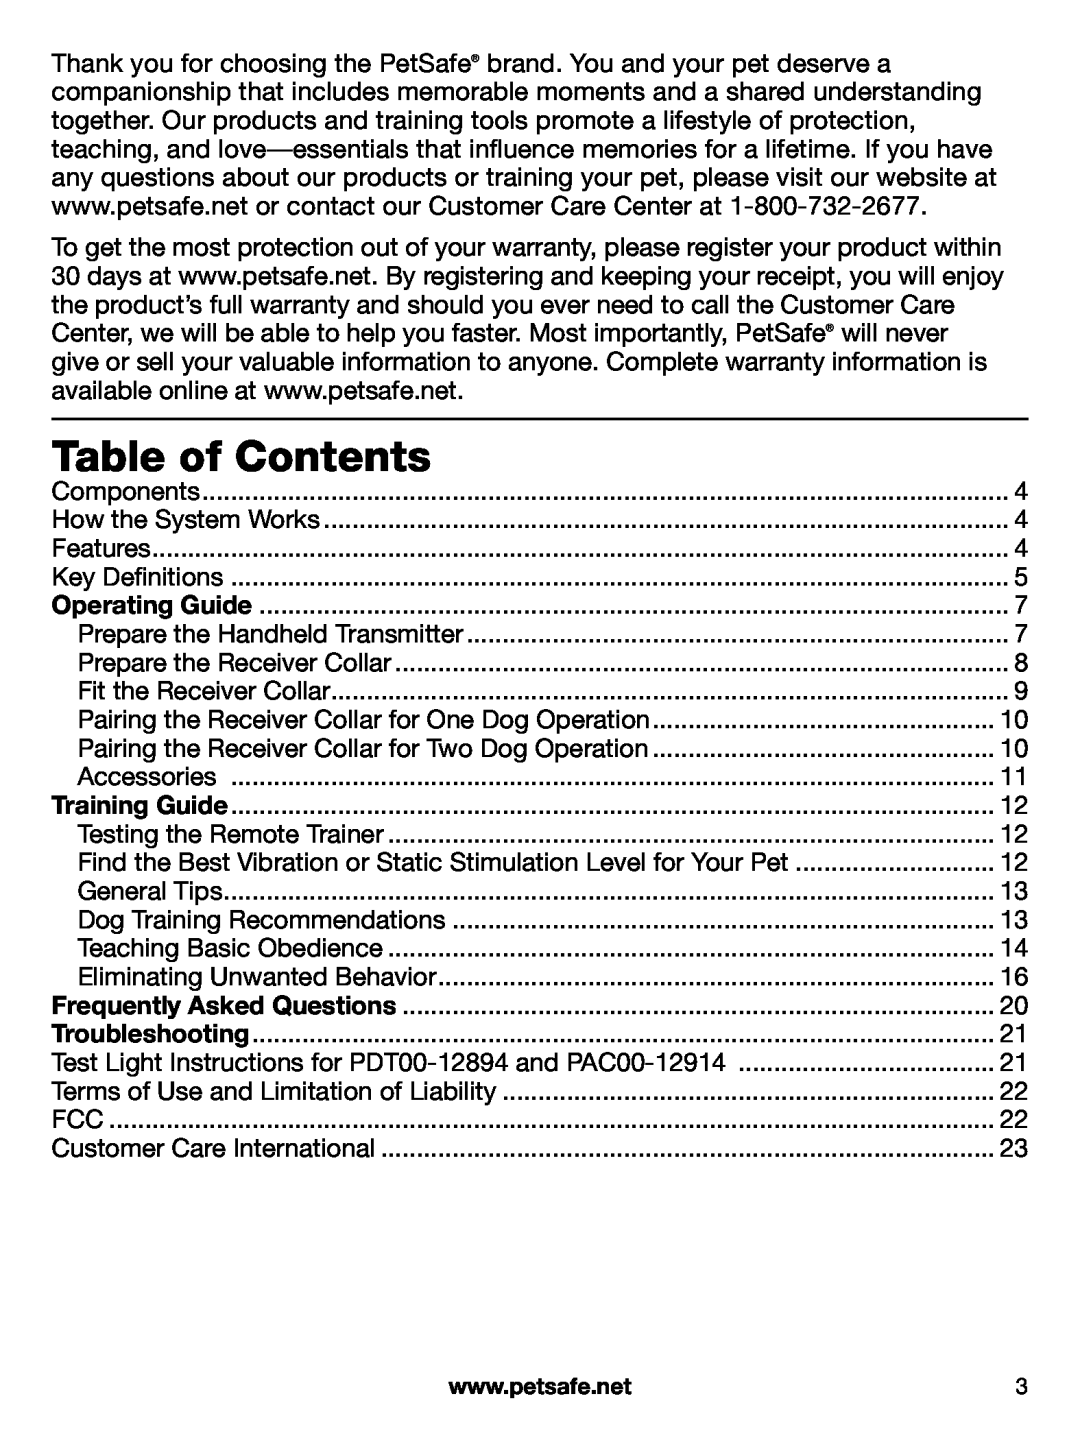 Petsafe PAC00-12914, PDT00-12894, PDT00-12892, PAC00-12893 manual Table of Contents 